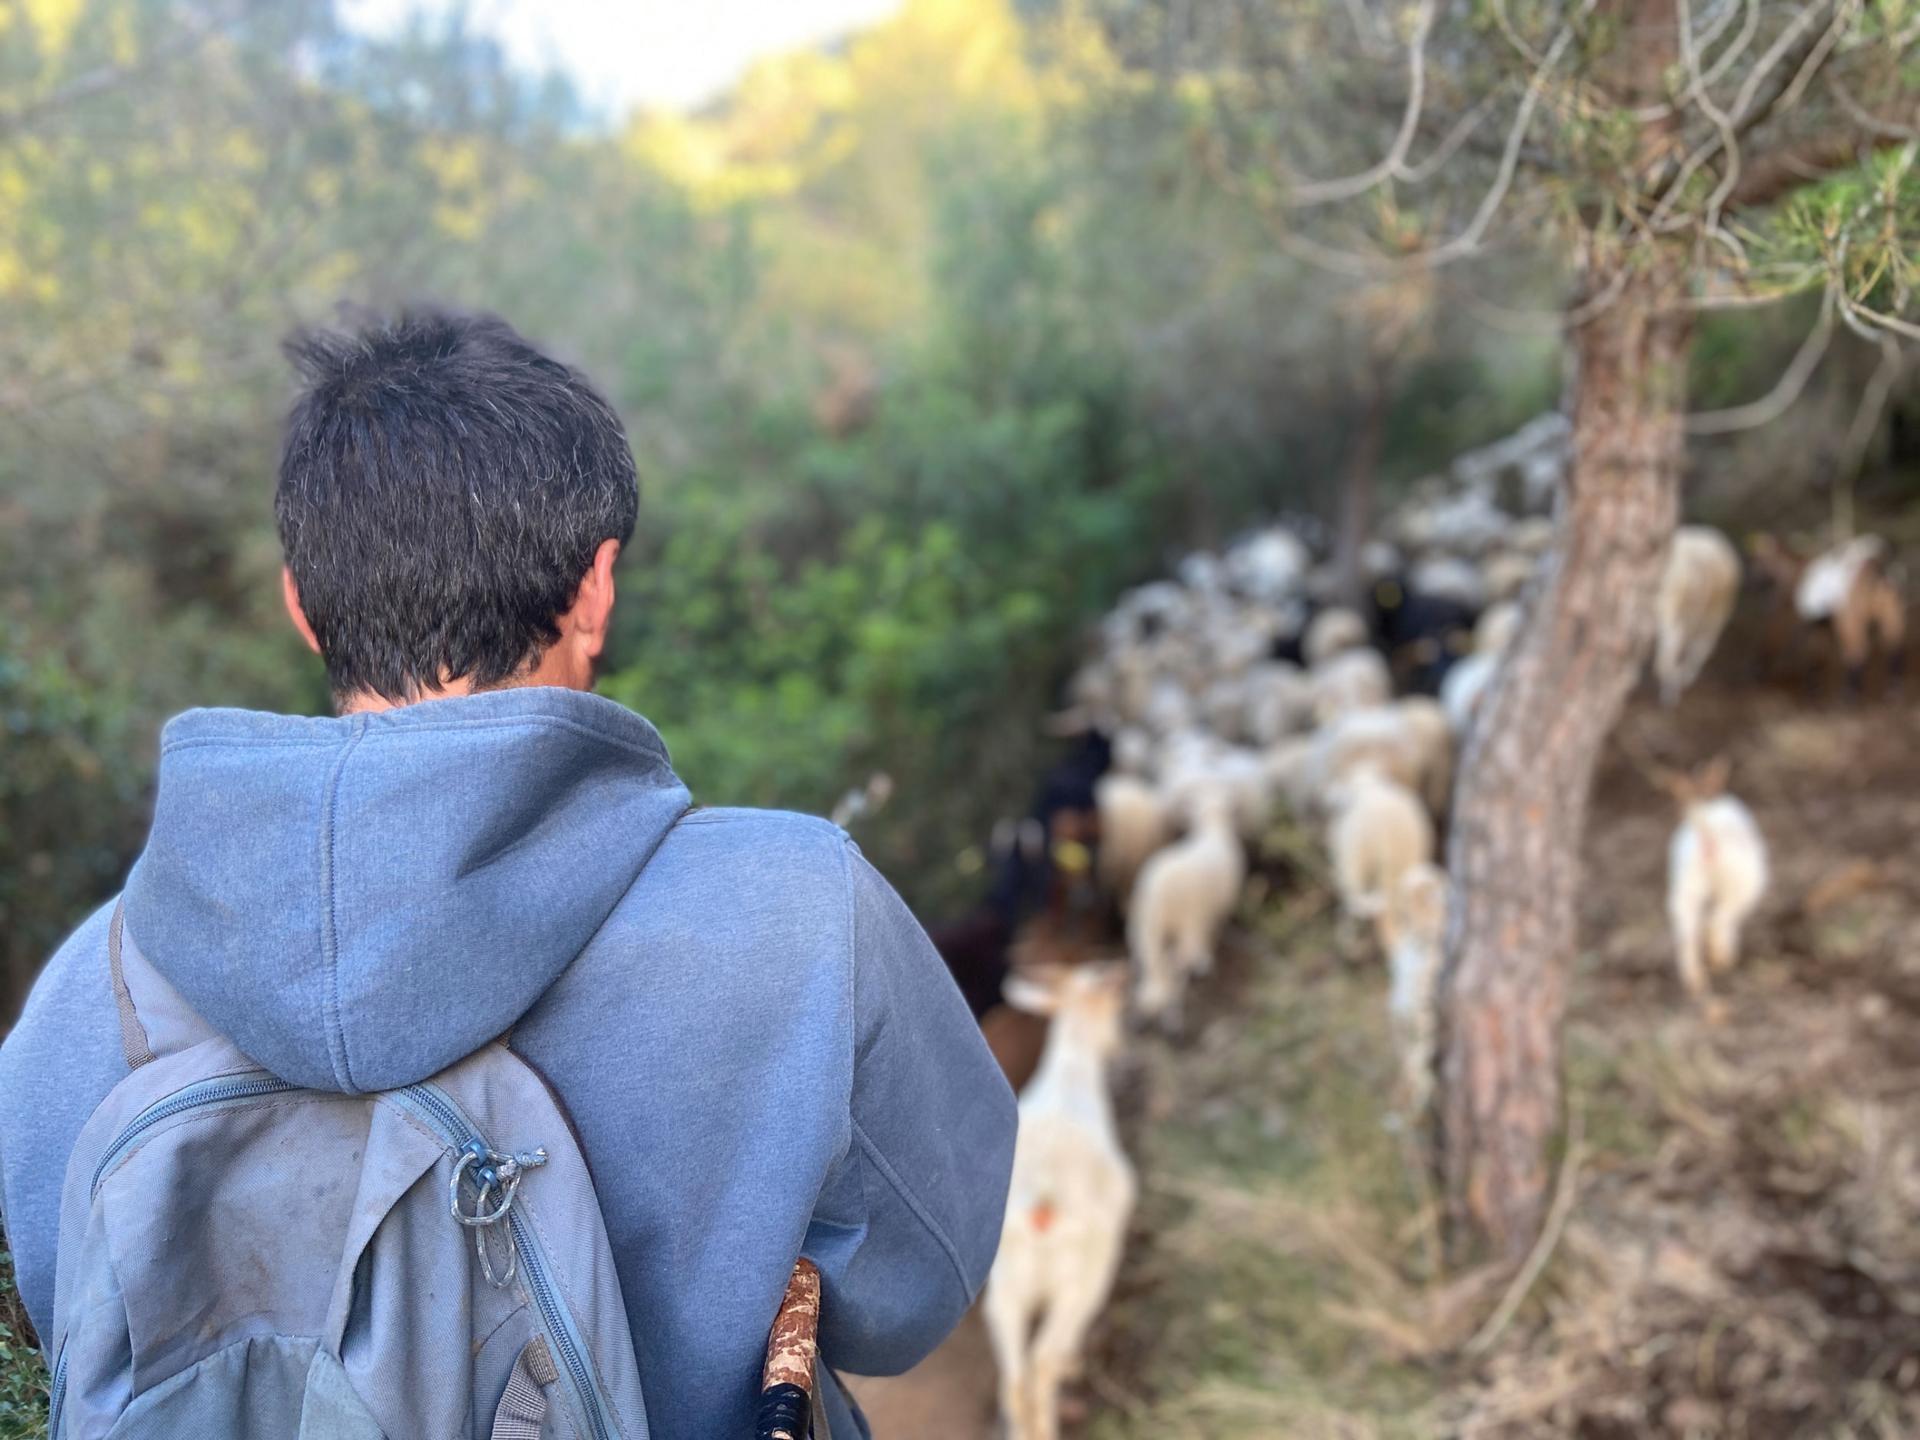 Barcelona shepherd Dani Sanchez, 35, follows his flock through a park just above the city. His "fire flock" eats the underbrush that can fuel forest fires.